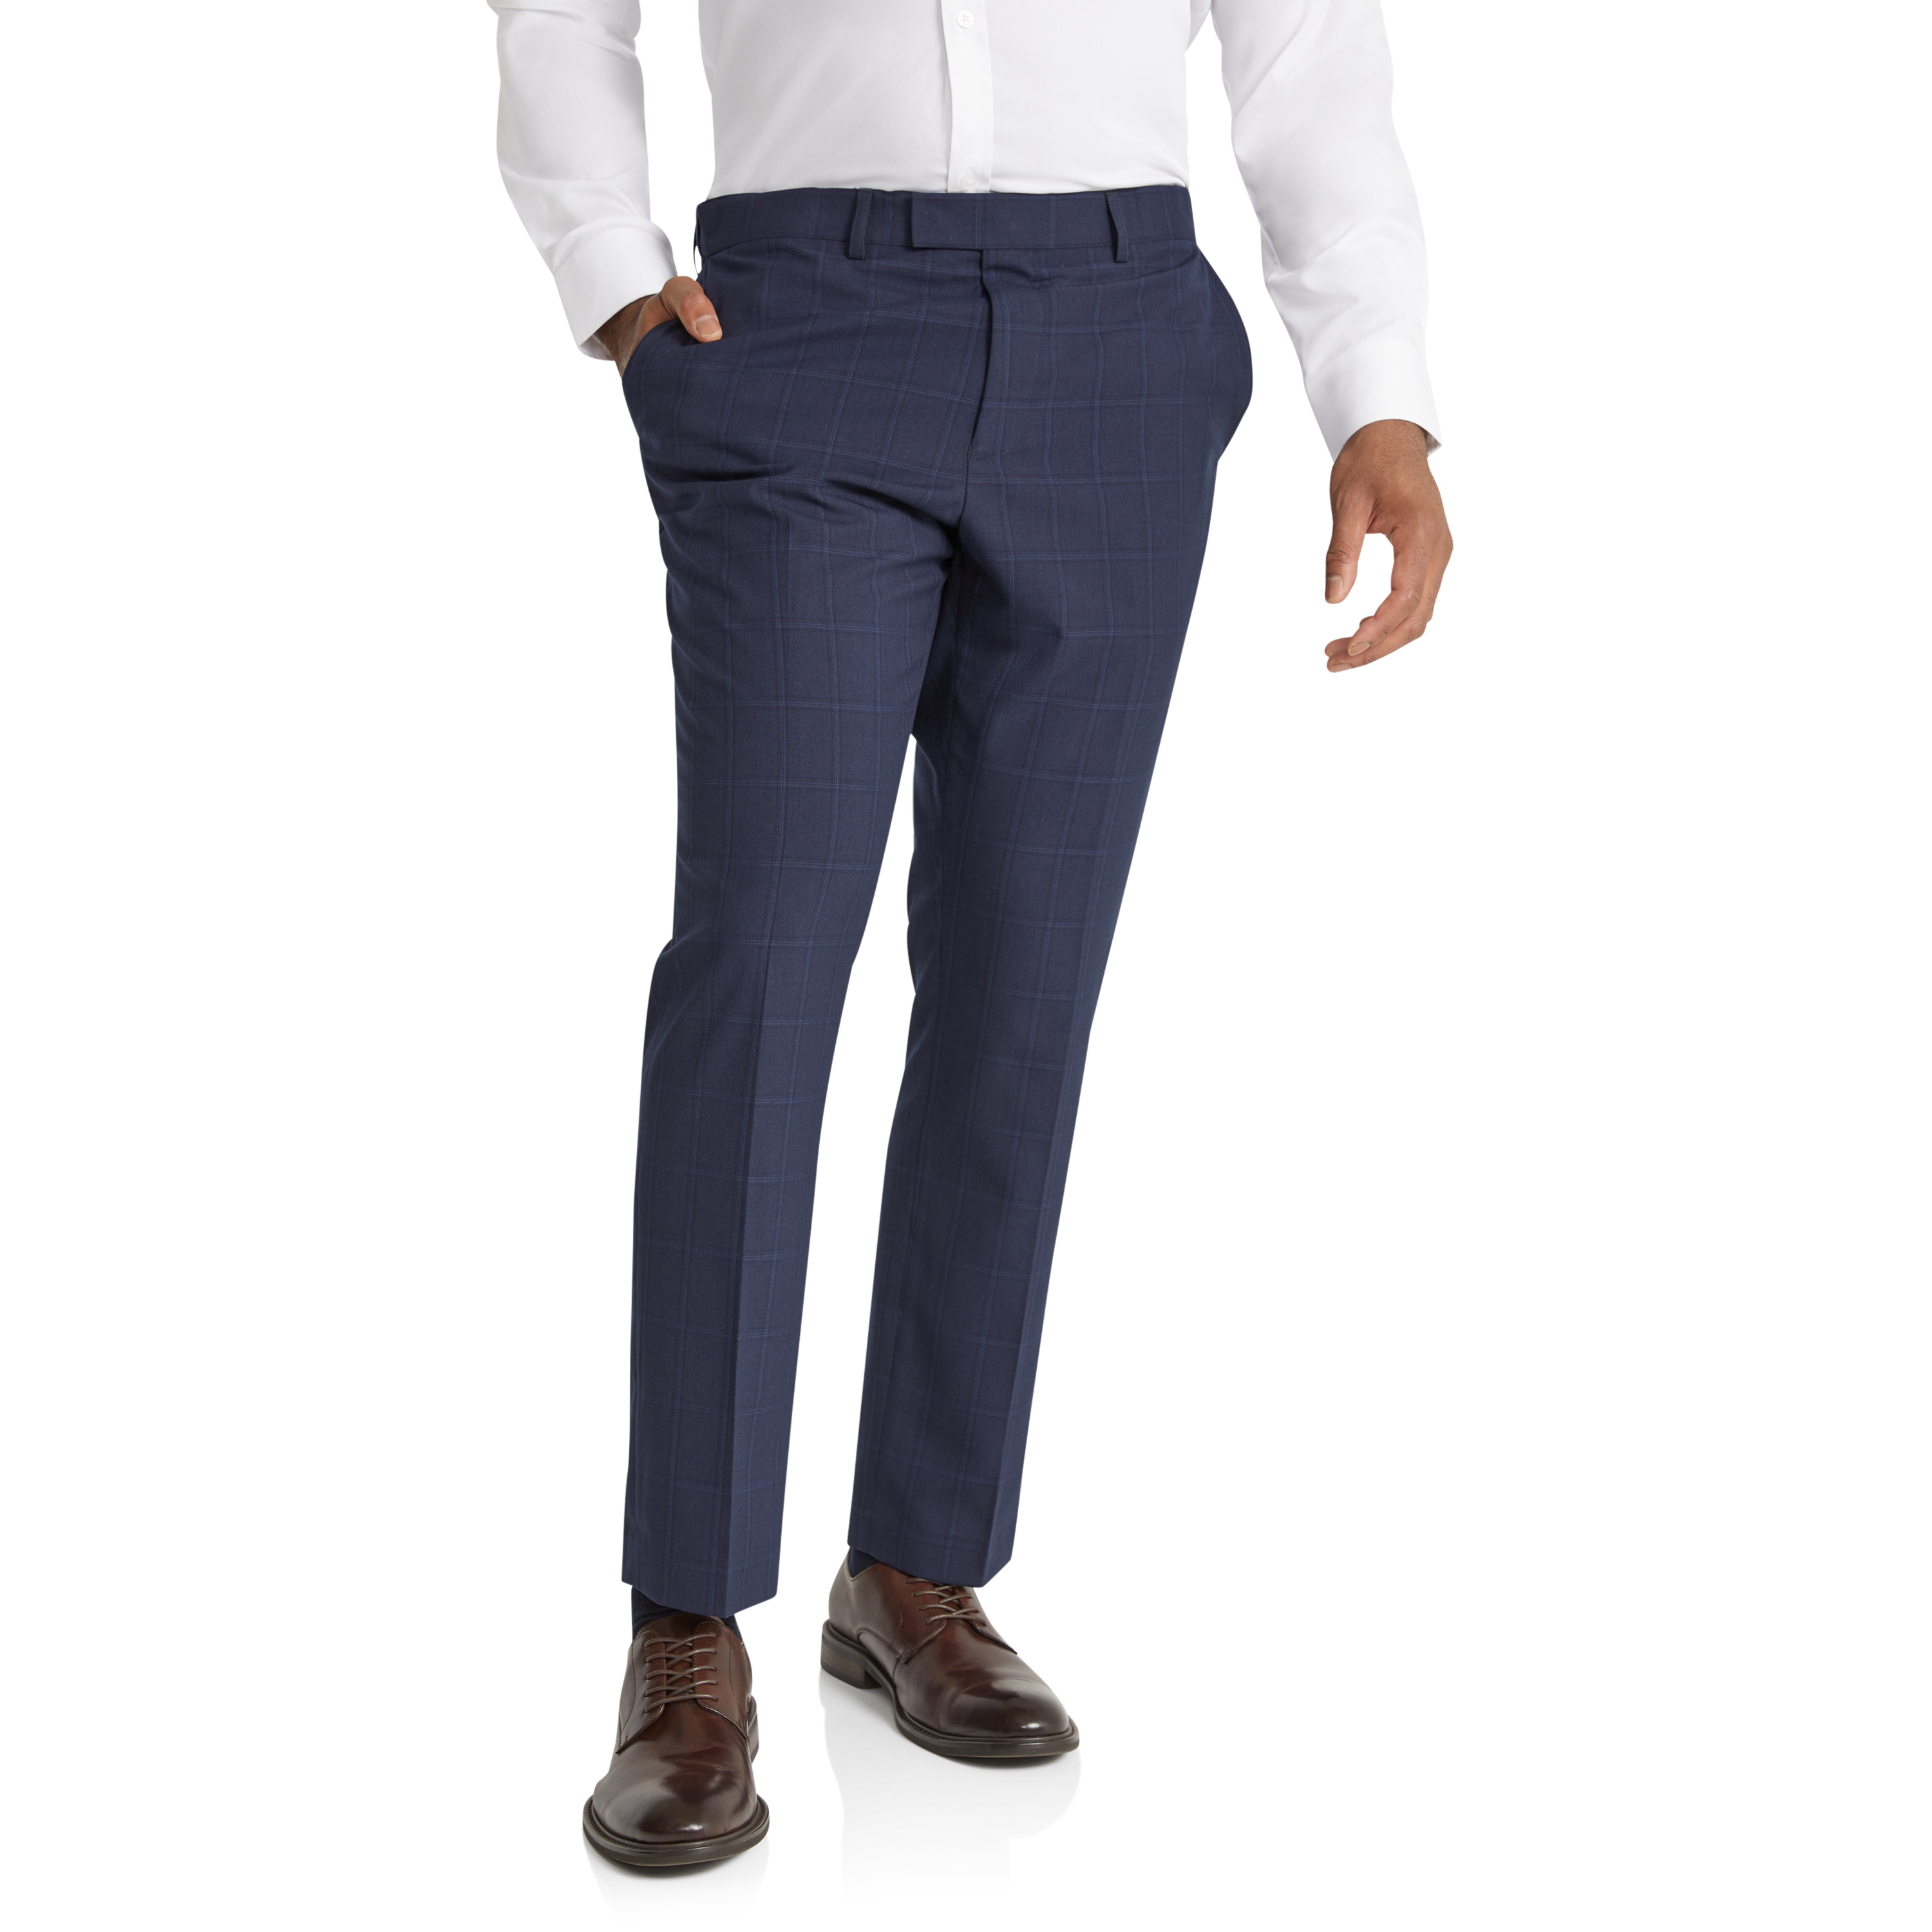 Men's Business Pants Skinny Fit Plaid Flat-Front Stretch Slim Stylish  Casual Golf Dress Pants at Amazon Men's Clothing store